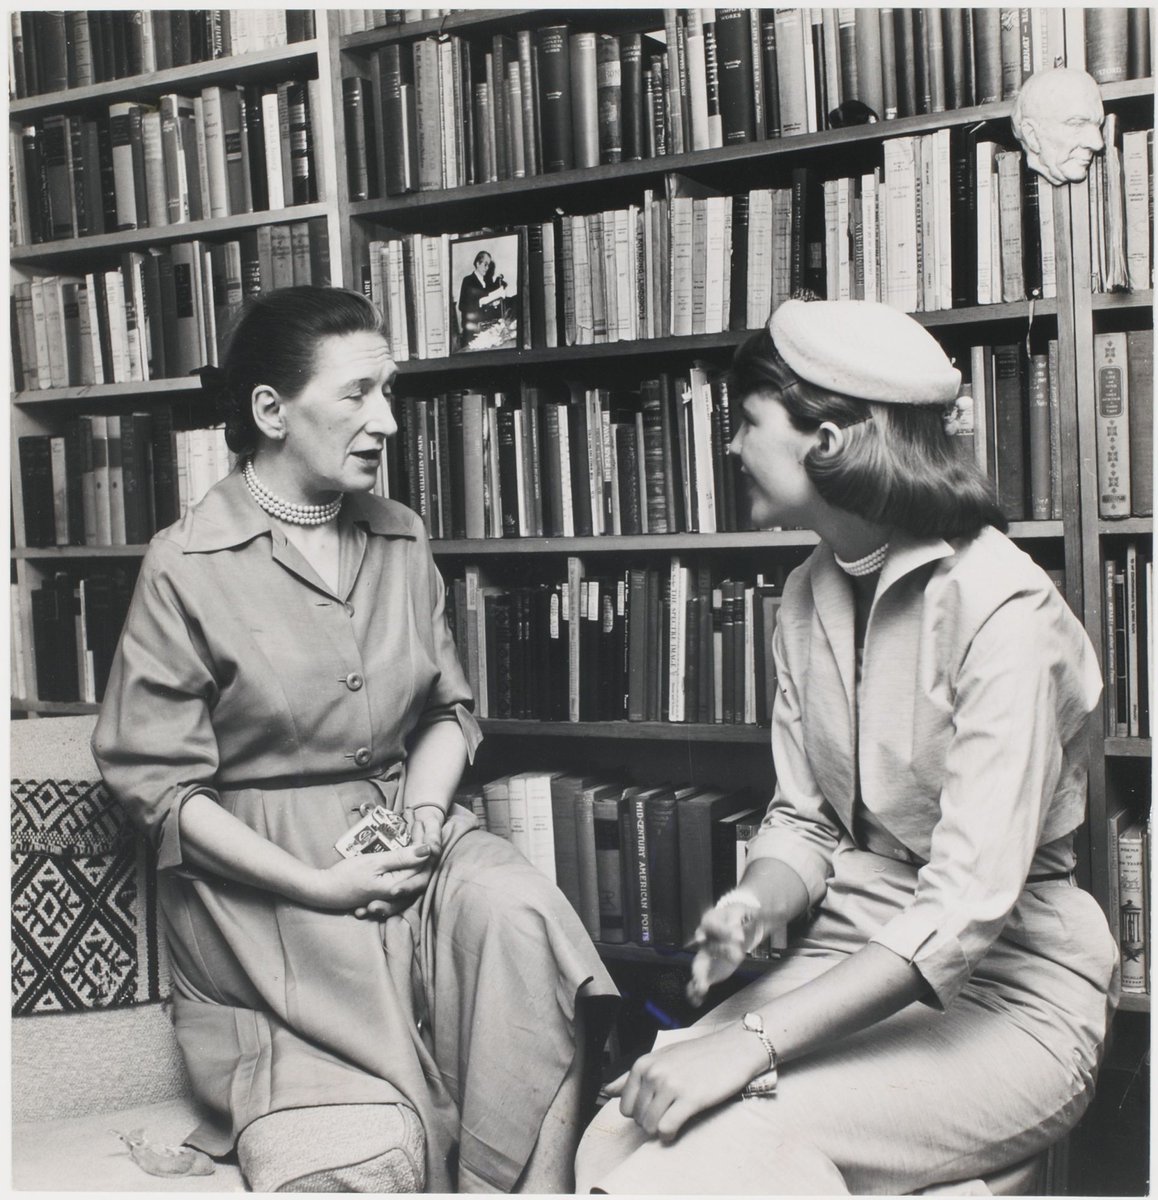 day 36 : elizabeth bowenirish-british novelist and short story writerlovers include american novelist carson mccullers and american poet may sartonshe is being interviewed by american poet sylvia plath in 3